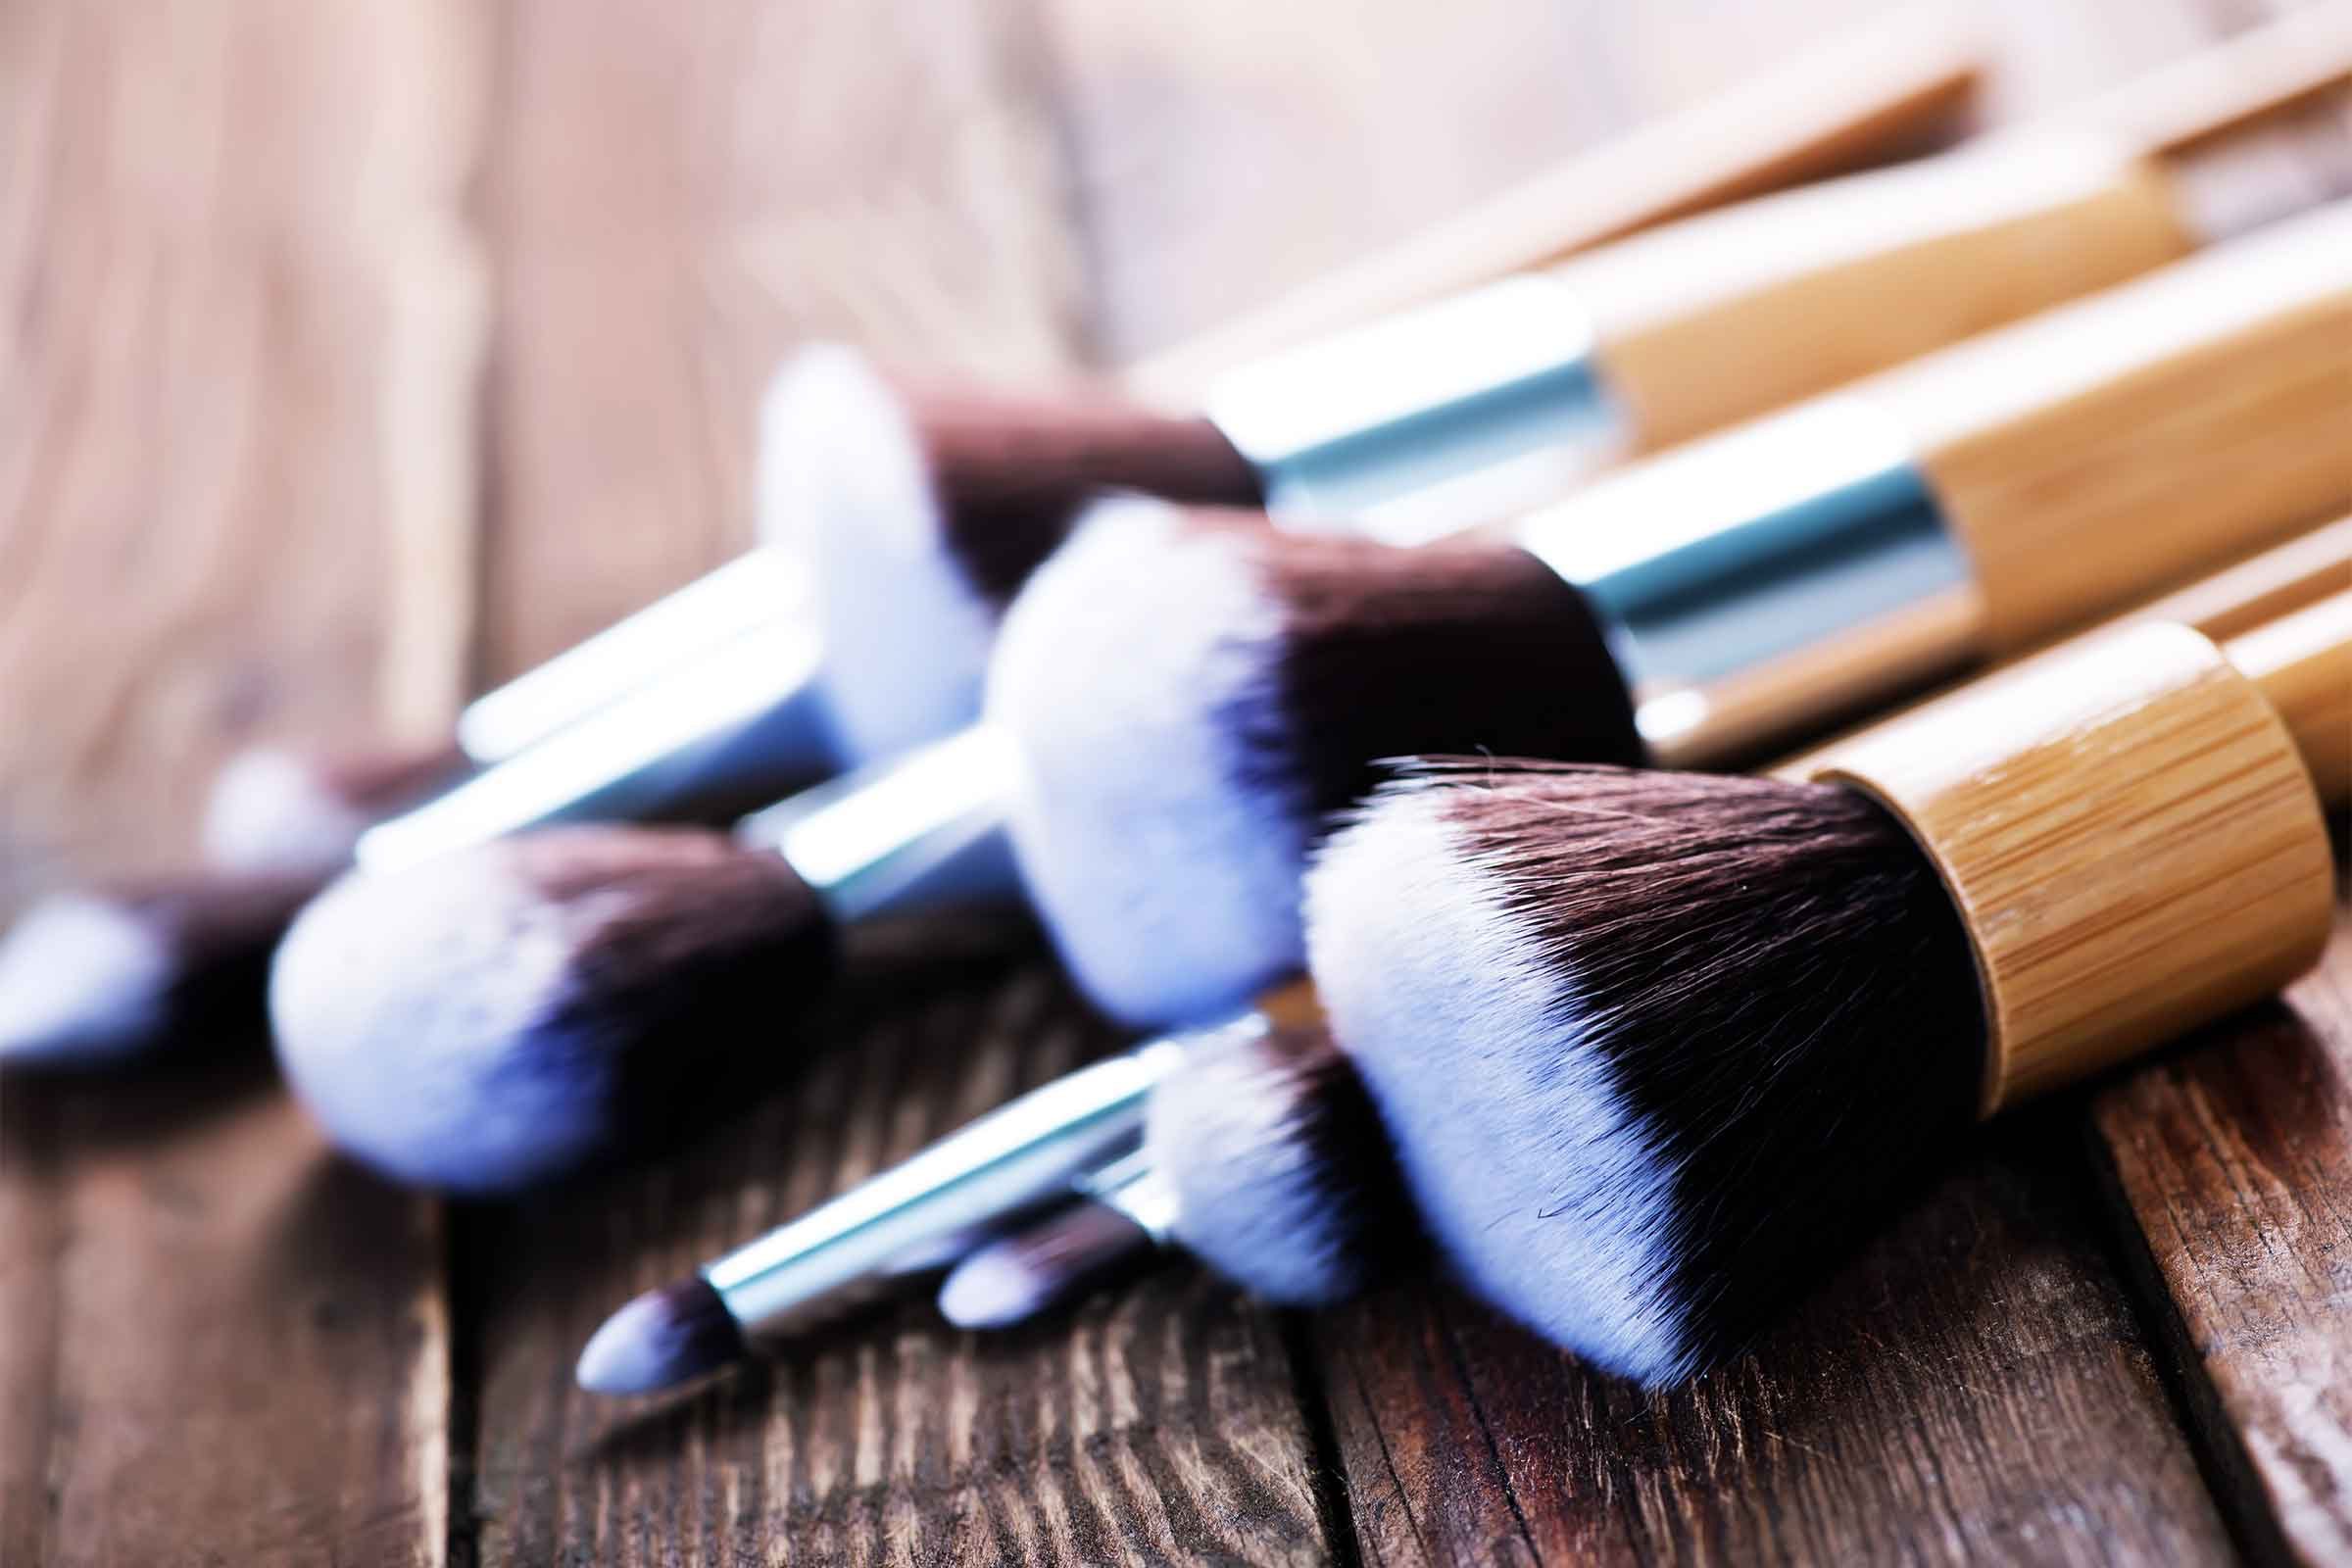 10 Gross Things That Can Happen When You Don’t Wash Your Makeup Tools